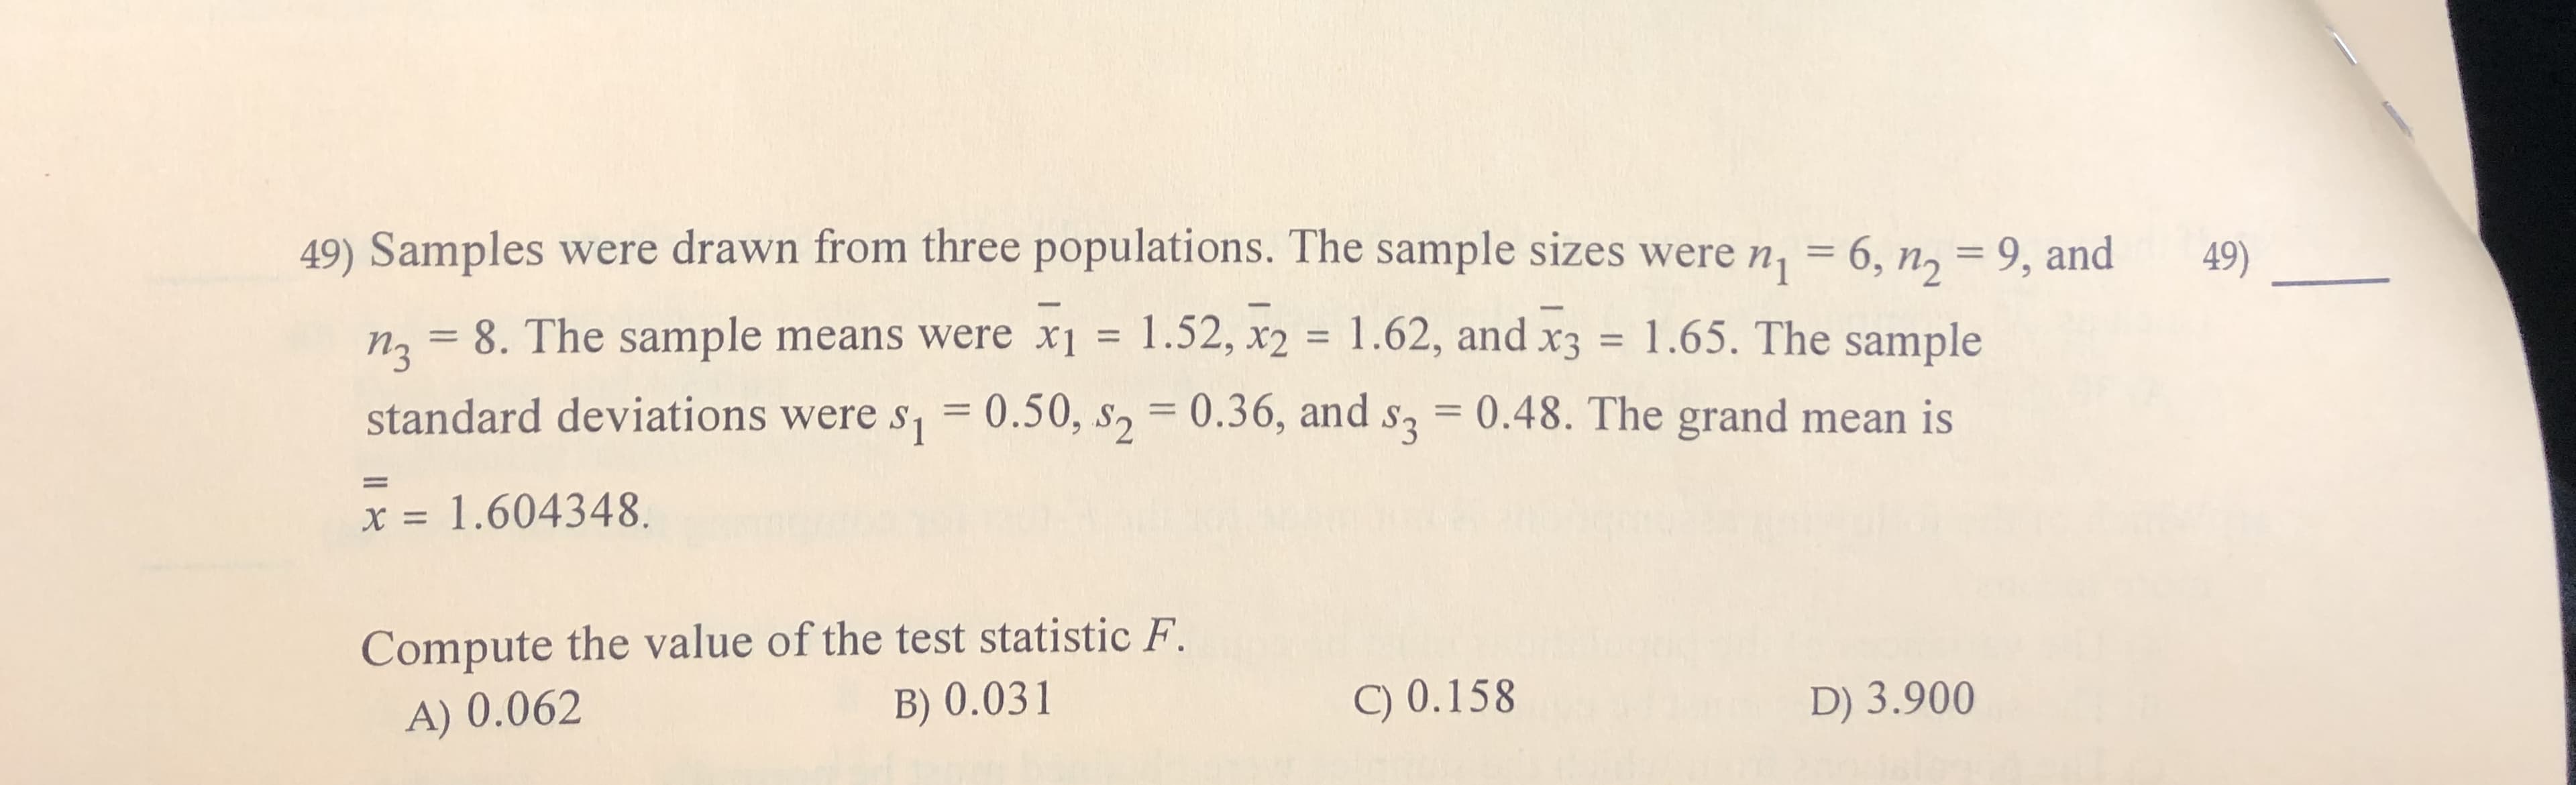 49) Samples were drawn from three populations. The sample sizes were n, = 6, n, = 9, and
49)
1
n2= 8. The sample means were x1
1.52, x2
x3 1.65. The sample
= 0.50, s2 0.36, and s3 0.48. The grand mean is
1.62, and
standard deviations were s
= 1.604348
х:
Compute the value of the test statistic F
B) 0.031
A) 0.062
C) 0.158
D) 3.900
